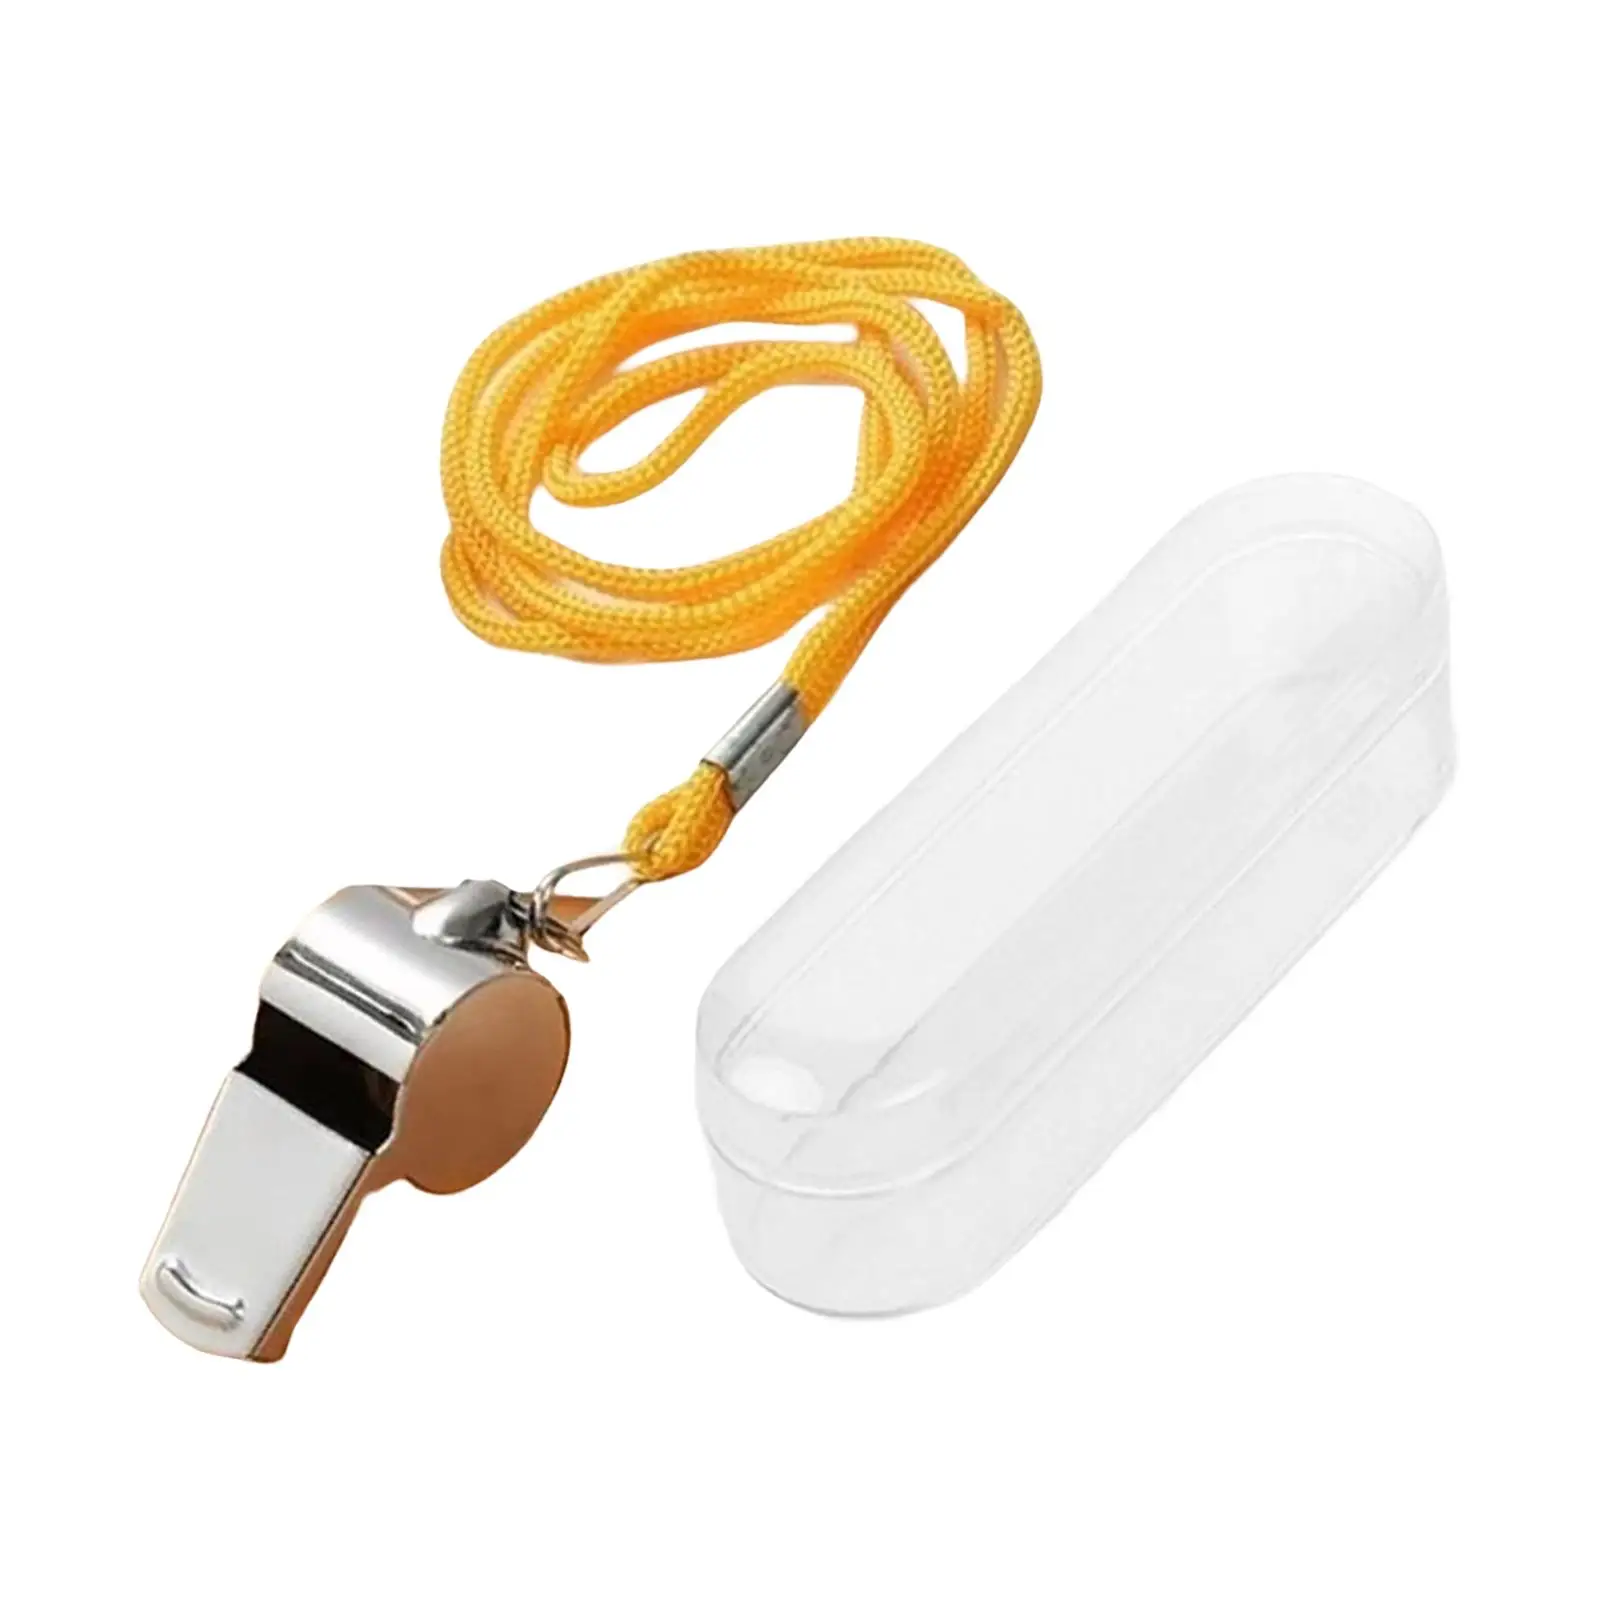 

Stainless Steel Sports Whistles Loud Crisp Sound with Lanyard Metal Whistle for Basketball Volleyball Soccer Training Emergency